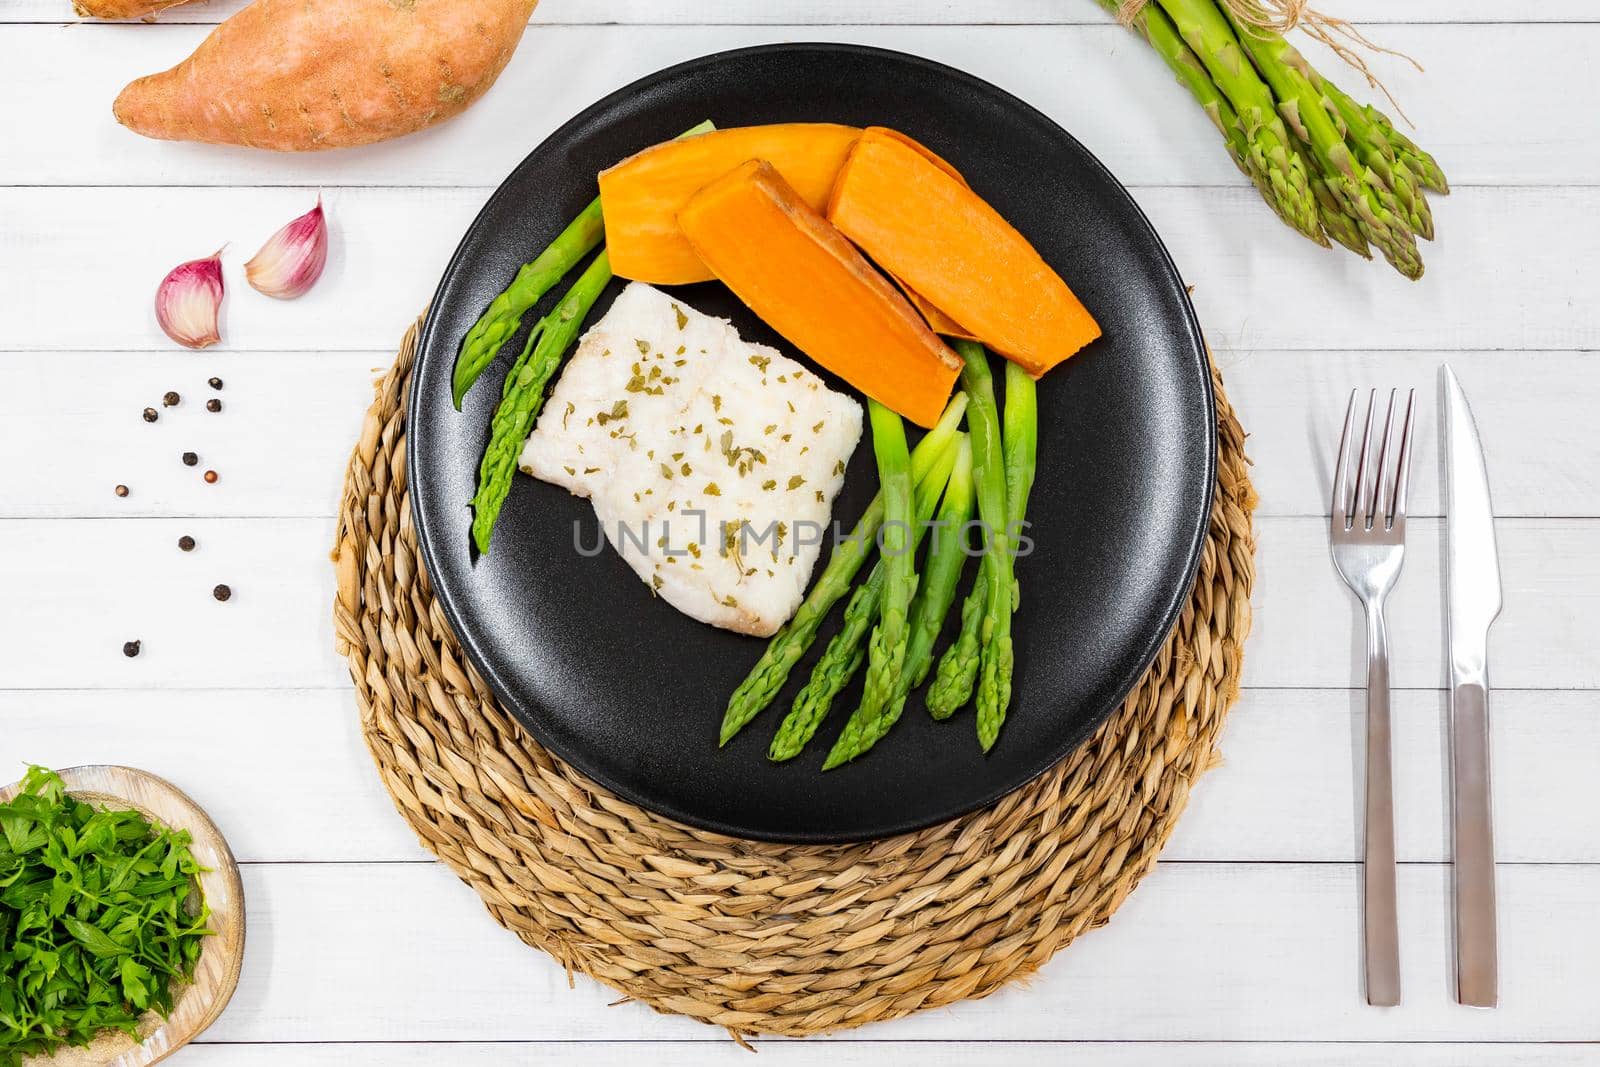 Top view of steamed white fish fillet with asparagus and sweet potato. A portion is served on a black plate in rustic style.